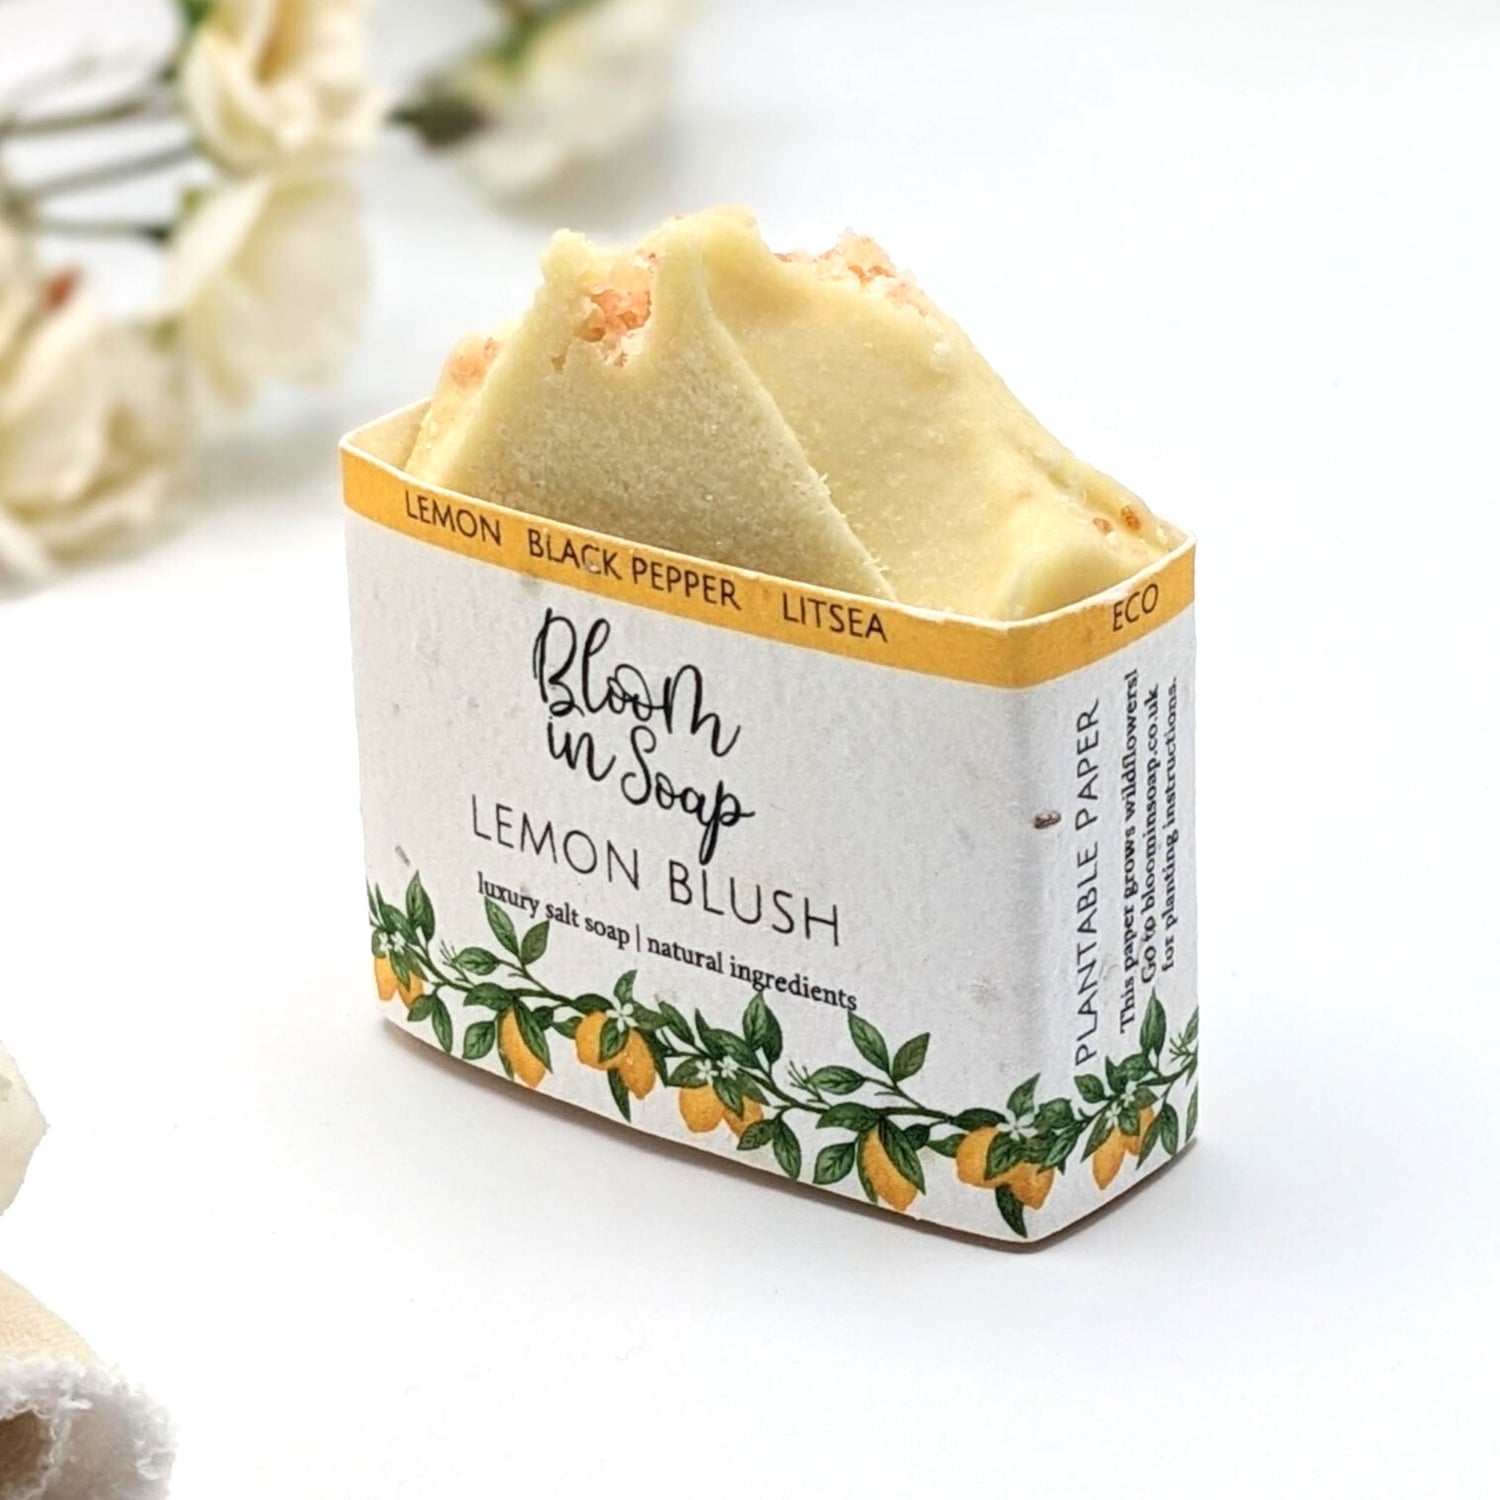 Lemon Blush natural soap from Bloom In Soap